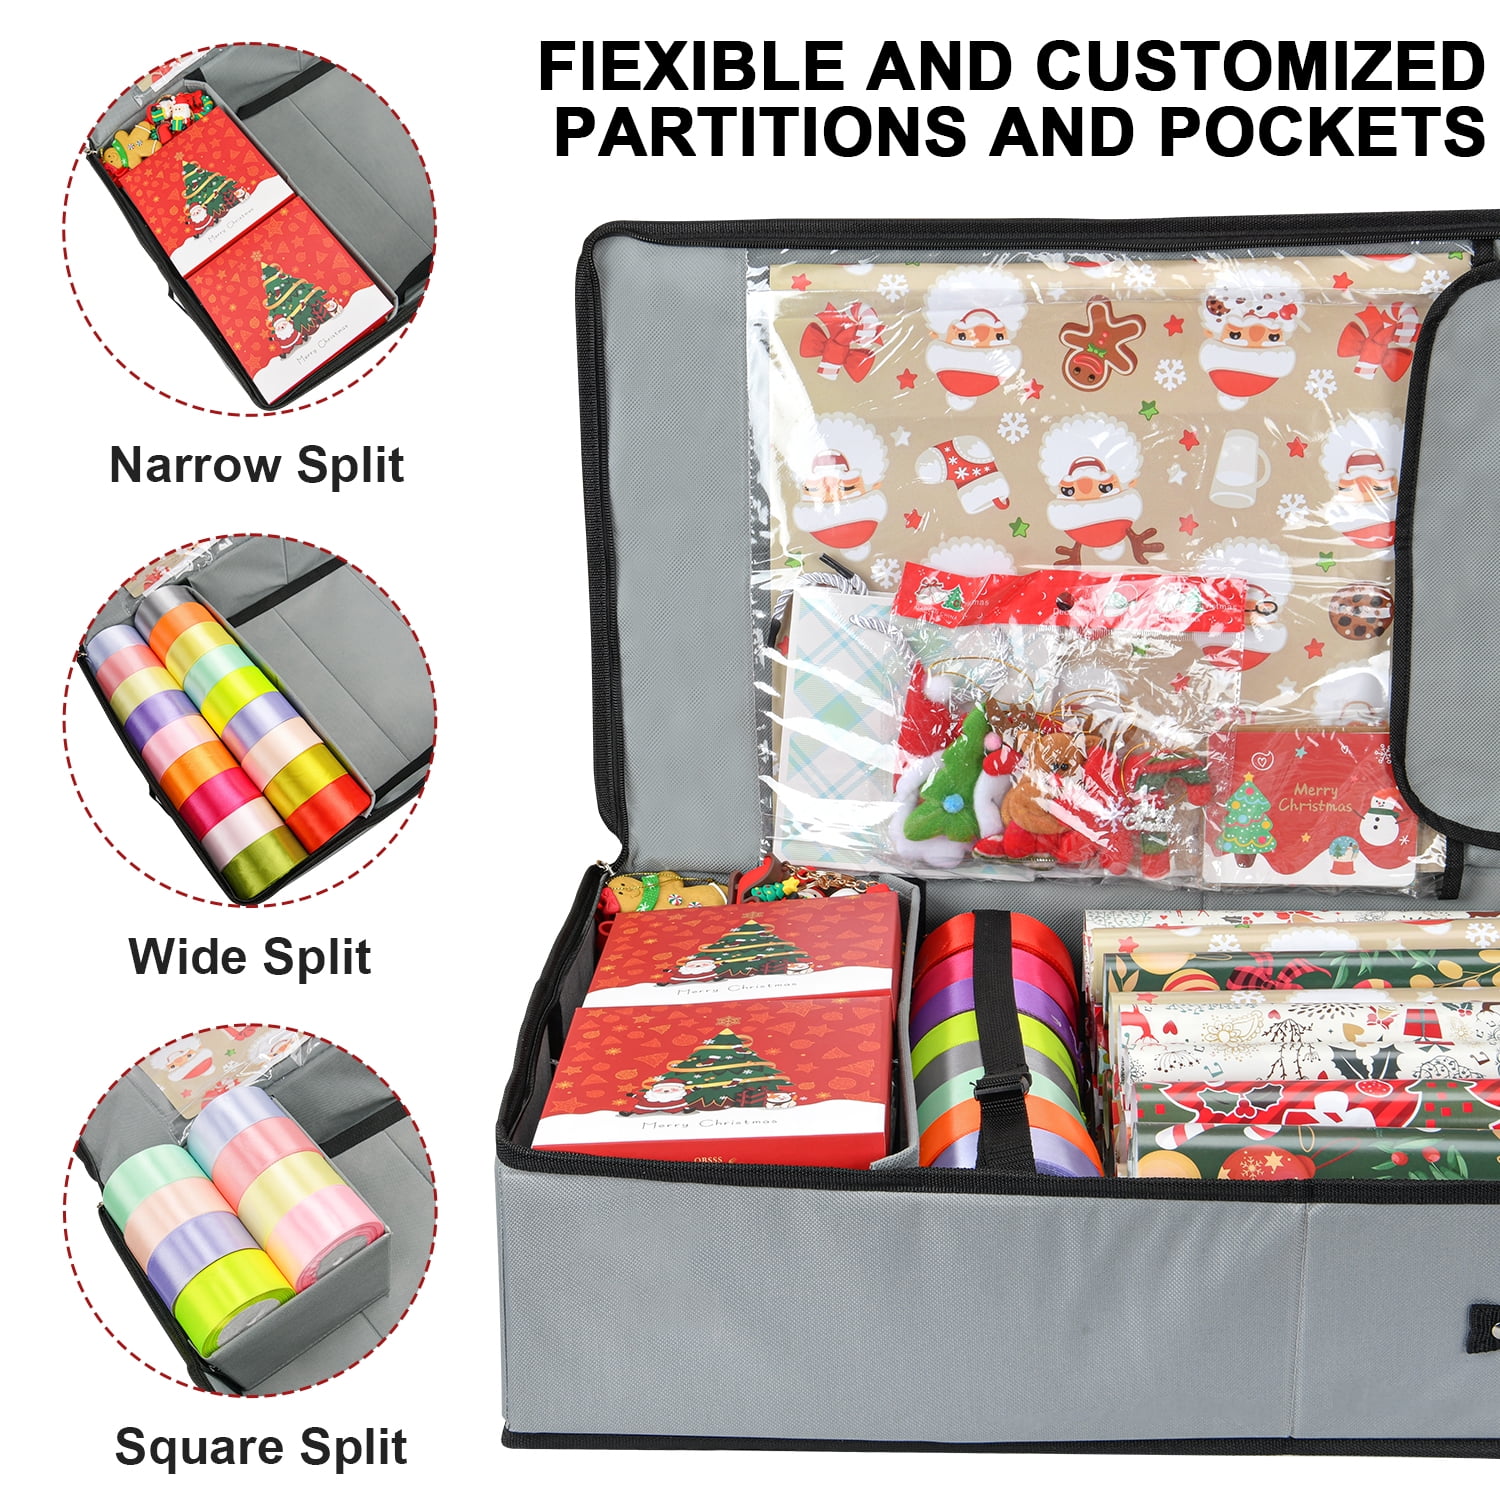 1pc Christmas Wrapping Storage Organizer With Flexible Partitions And  Pockets, Large Capacity Gift Wrap Storage Bag Fits Ribbon, Ornaments,  Holiday